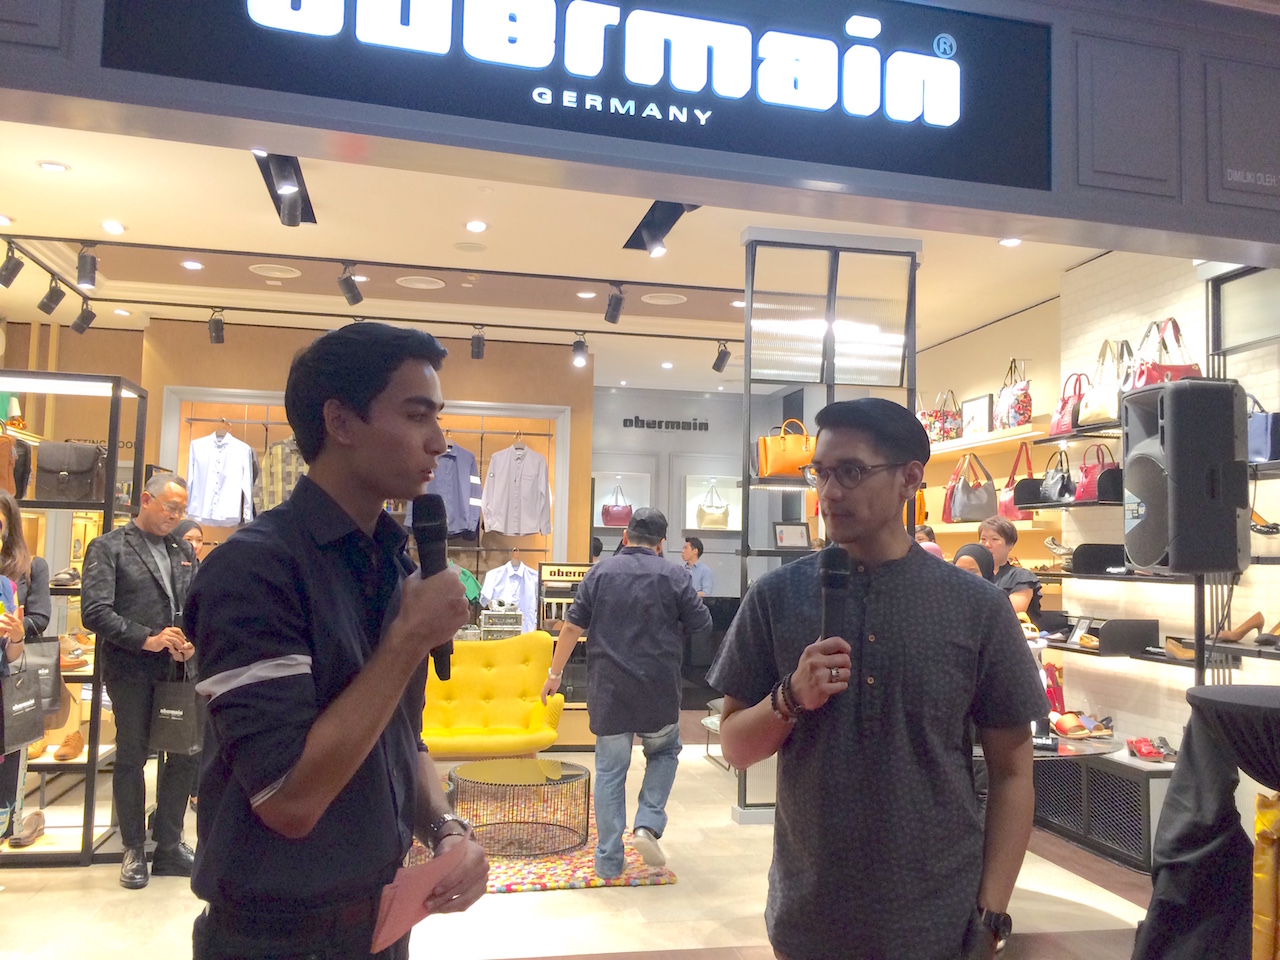 Indonesian pop singer Afgan made special appearance at the opening of Overman's new concept store at Mid Valley Megamall yesterday